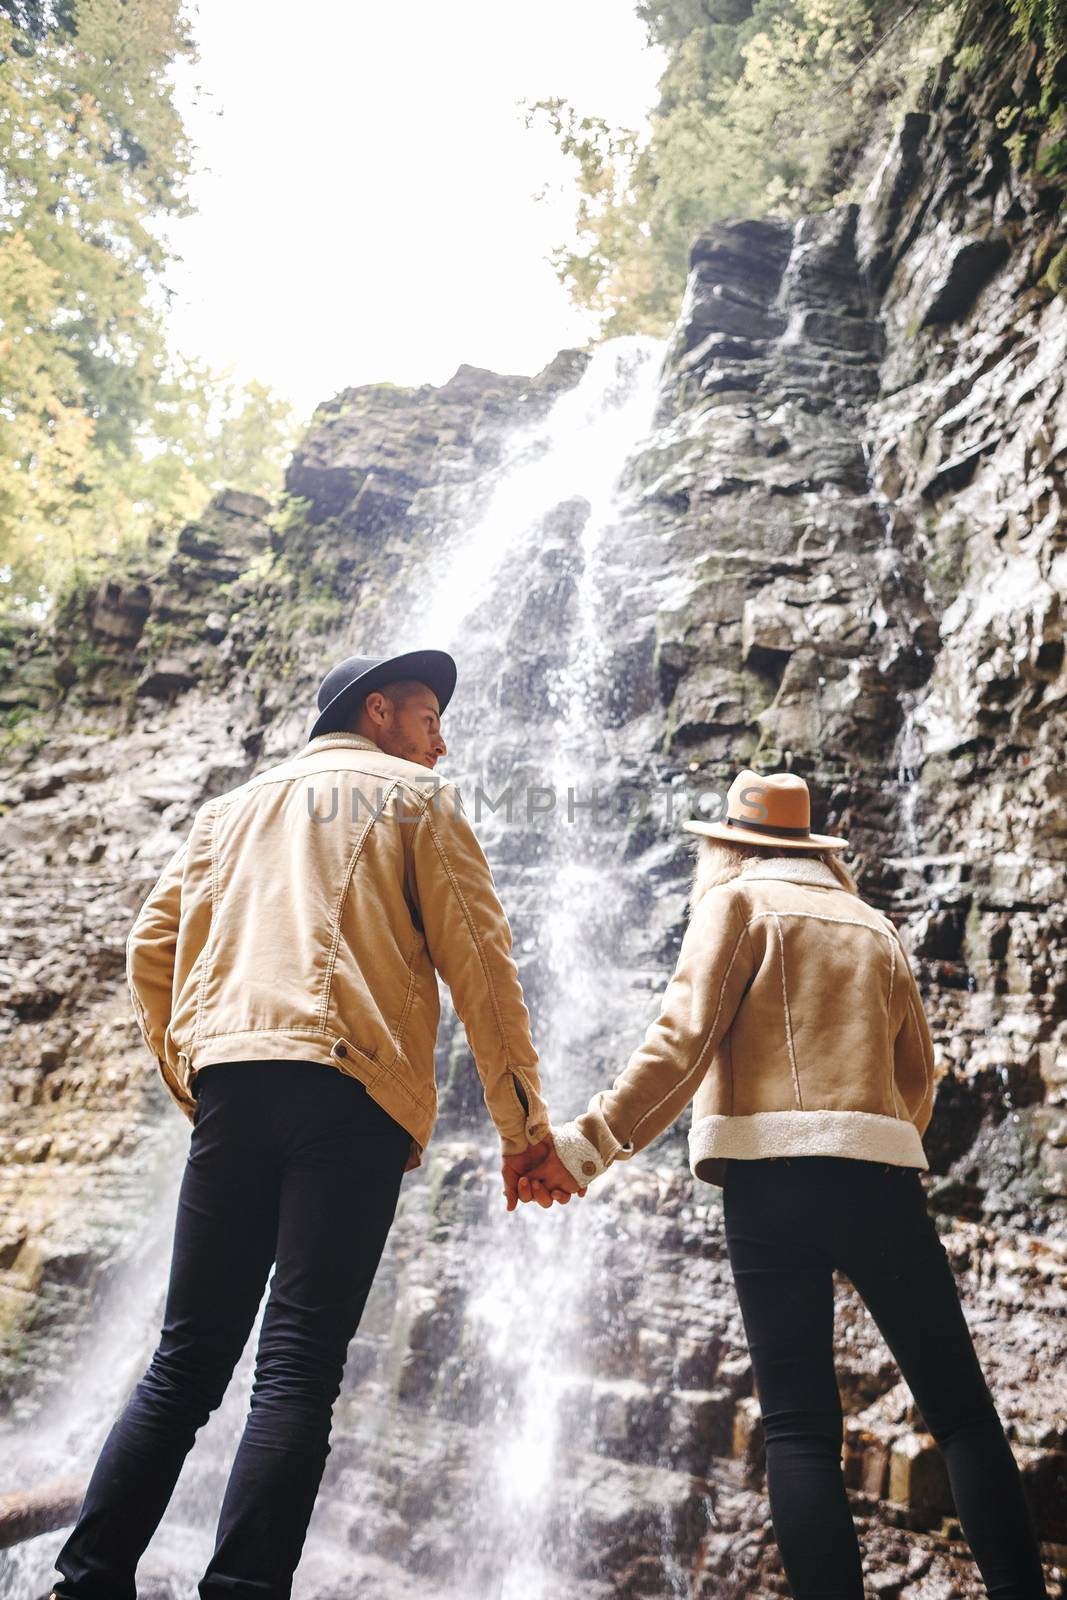 Young and beautiful couple at the mountain waterfall - Happy tourists visiting mountains. Lovestory. Tourists in hats. Military fashion. by Denys_N